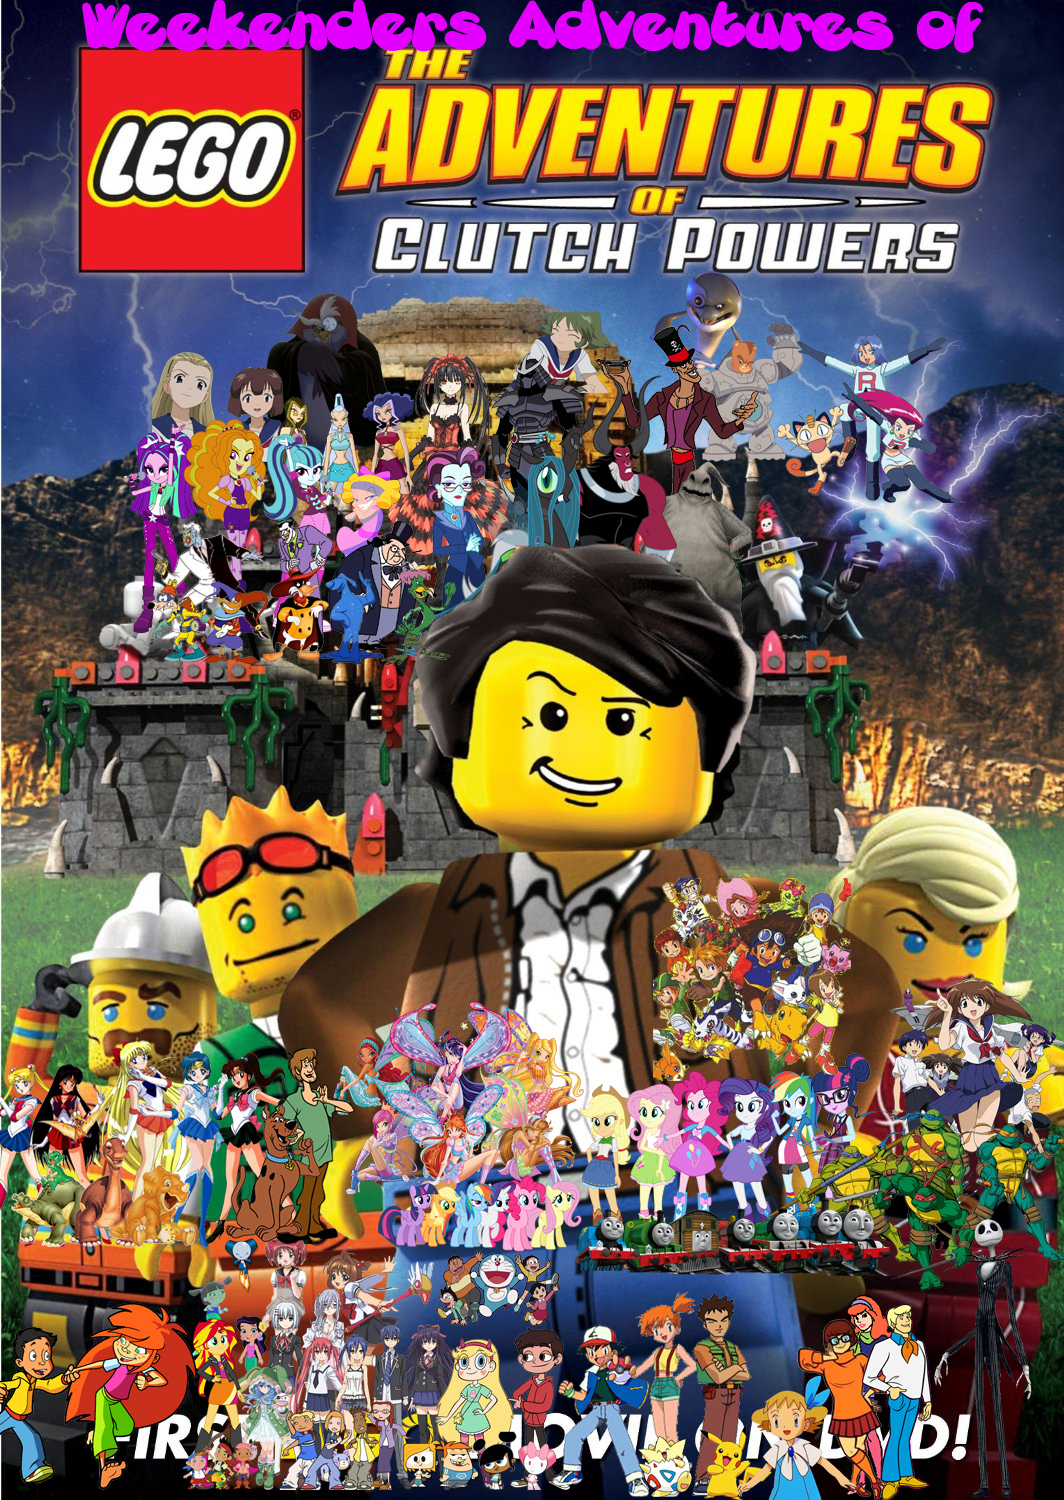 High Resolution Wallpaper | Lego: The Adventures Of Clutch Powers 1064x1500 px